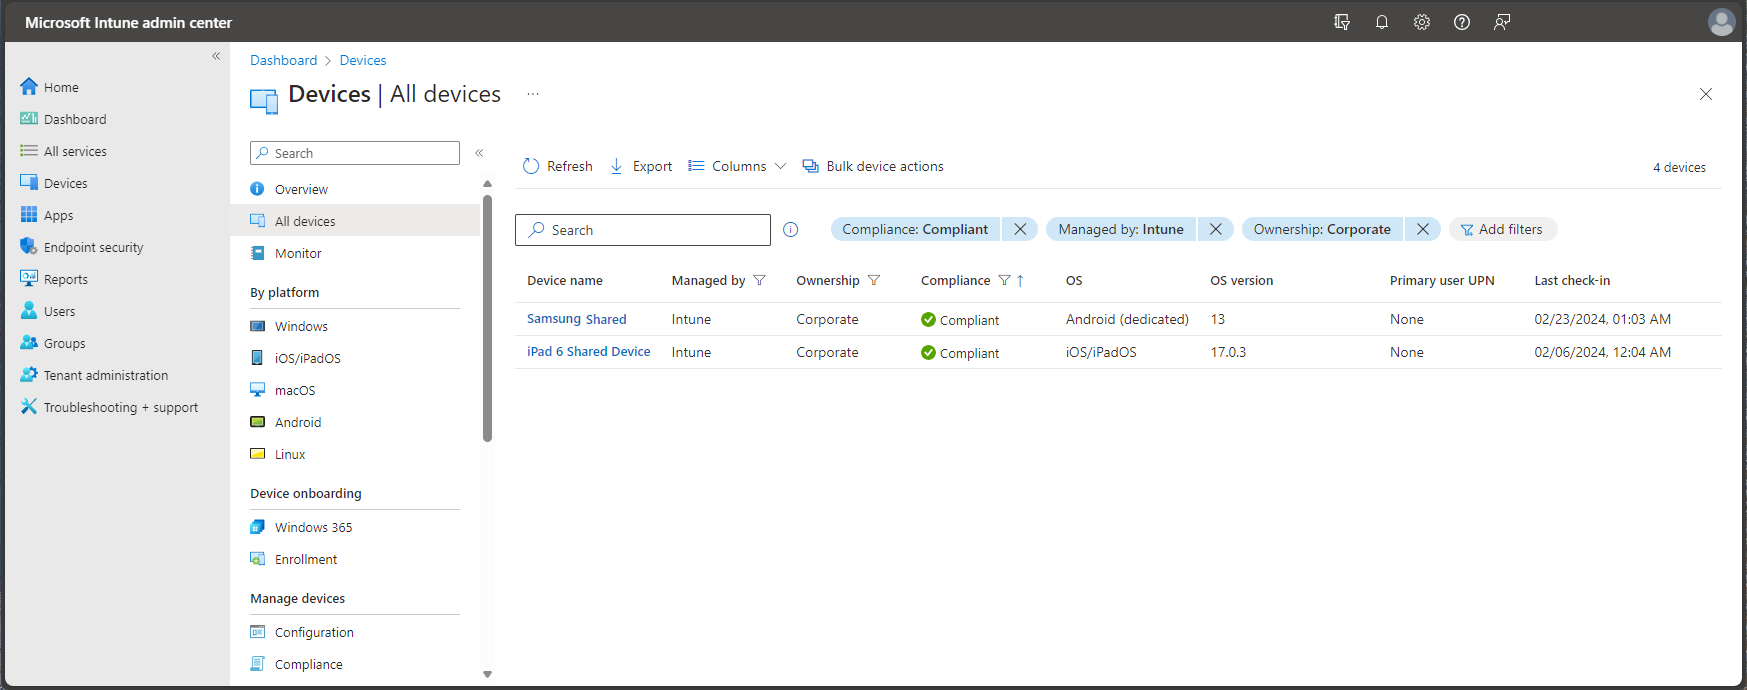 Screenshot of the Microsoft Endpoint Manager admin center - All devices